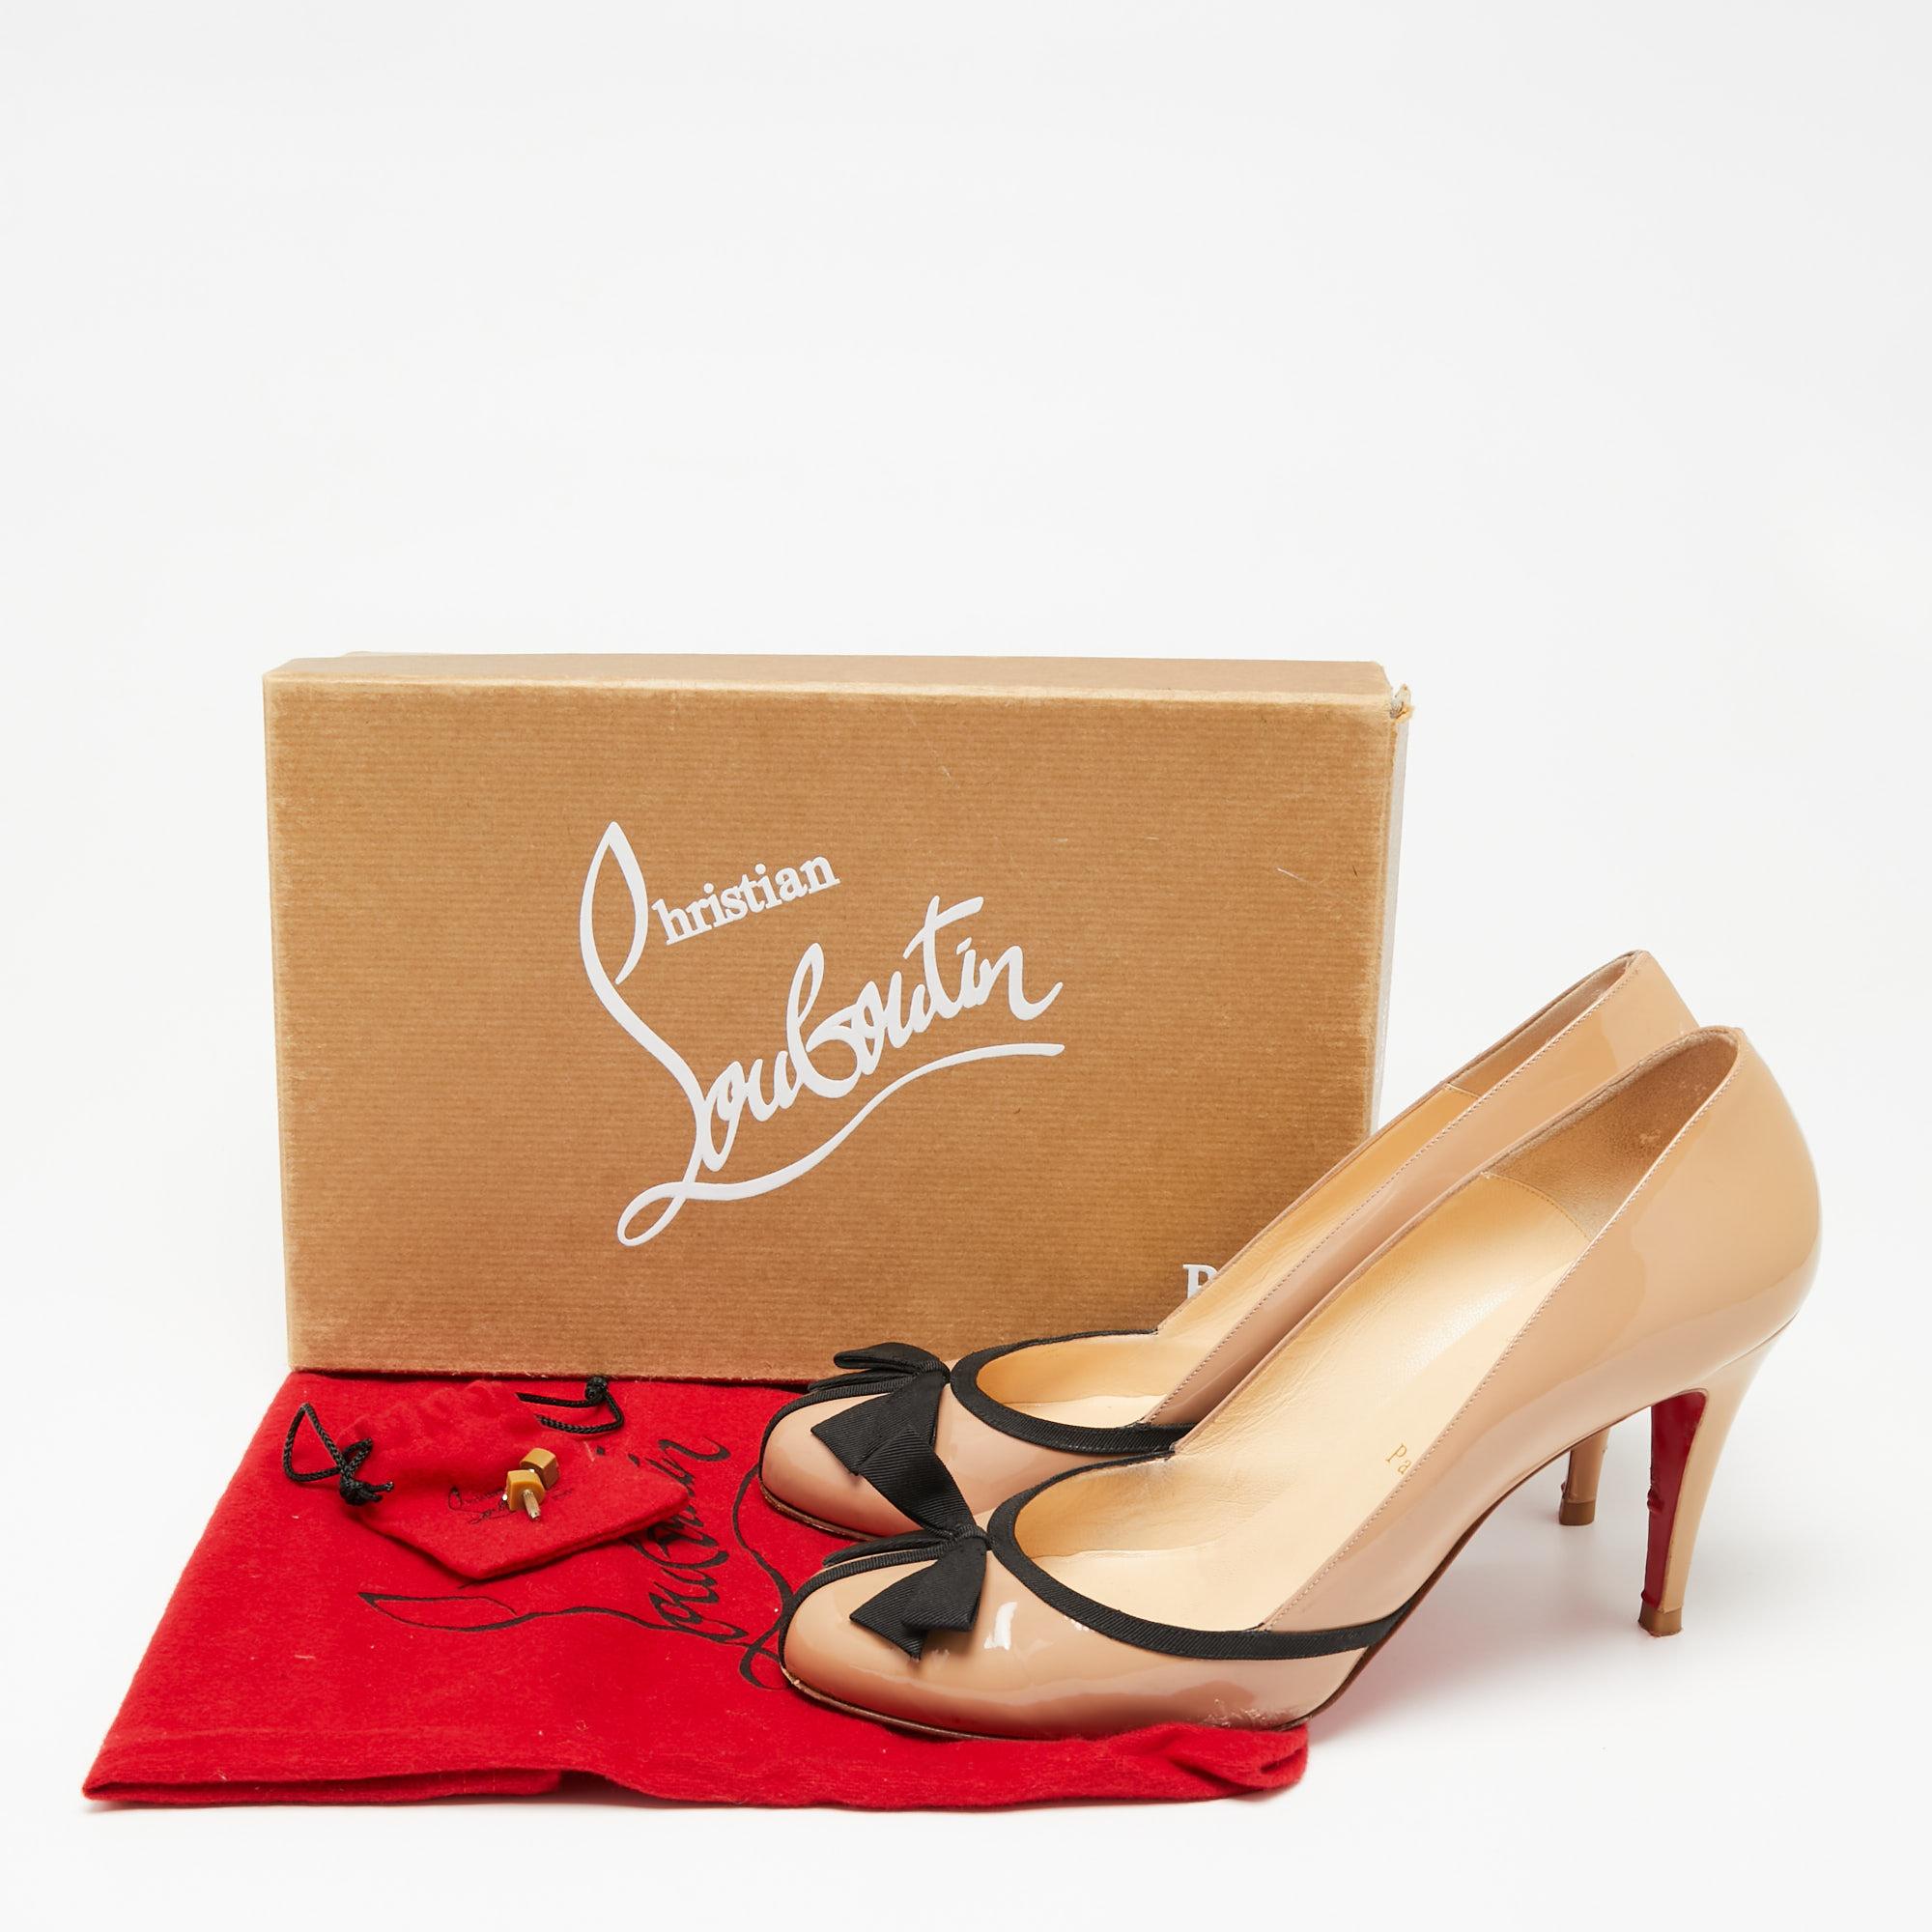 Christian Louboutin Beige Patent Leather Lavalliere Pumps Size 39.5 For Sale 2